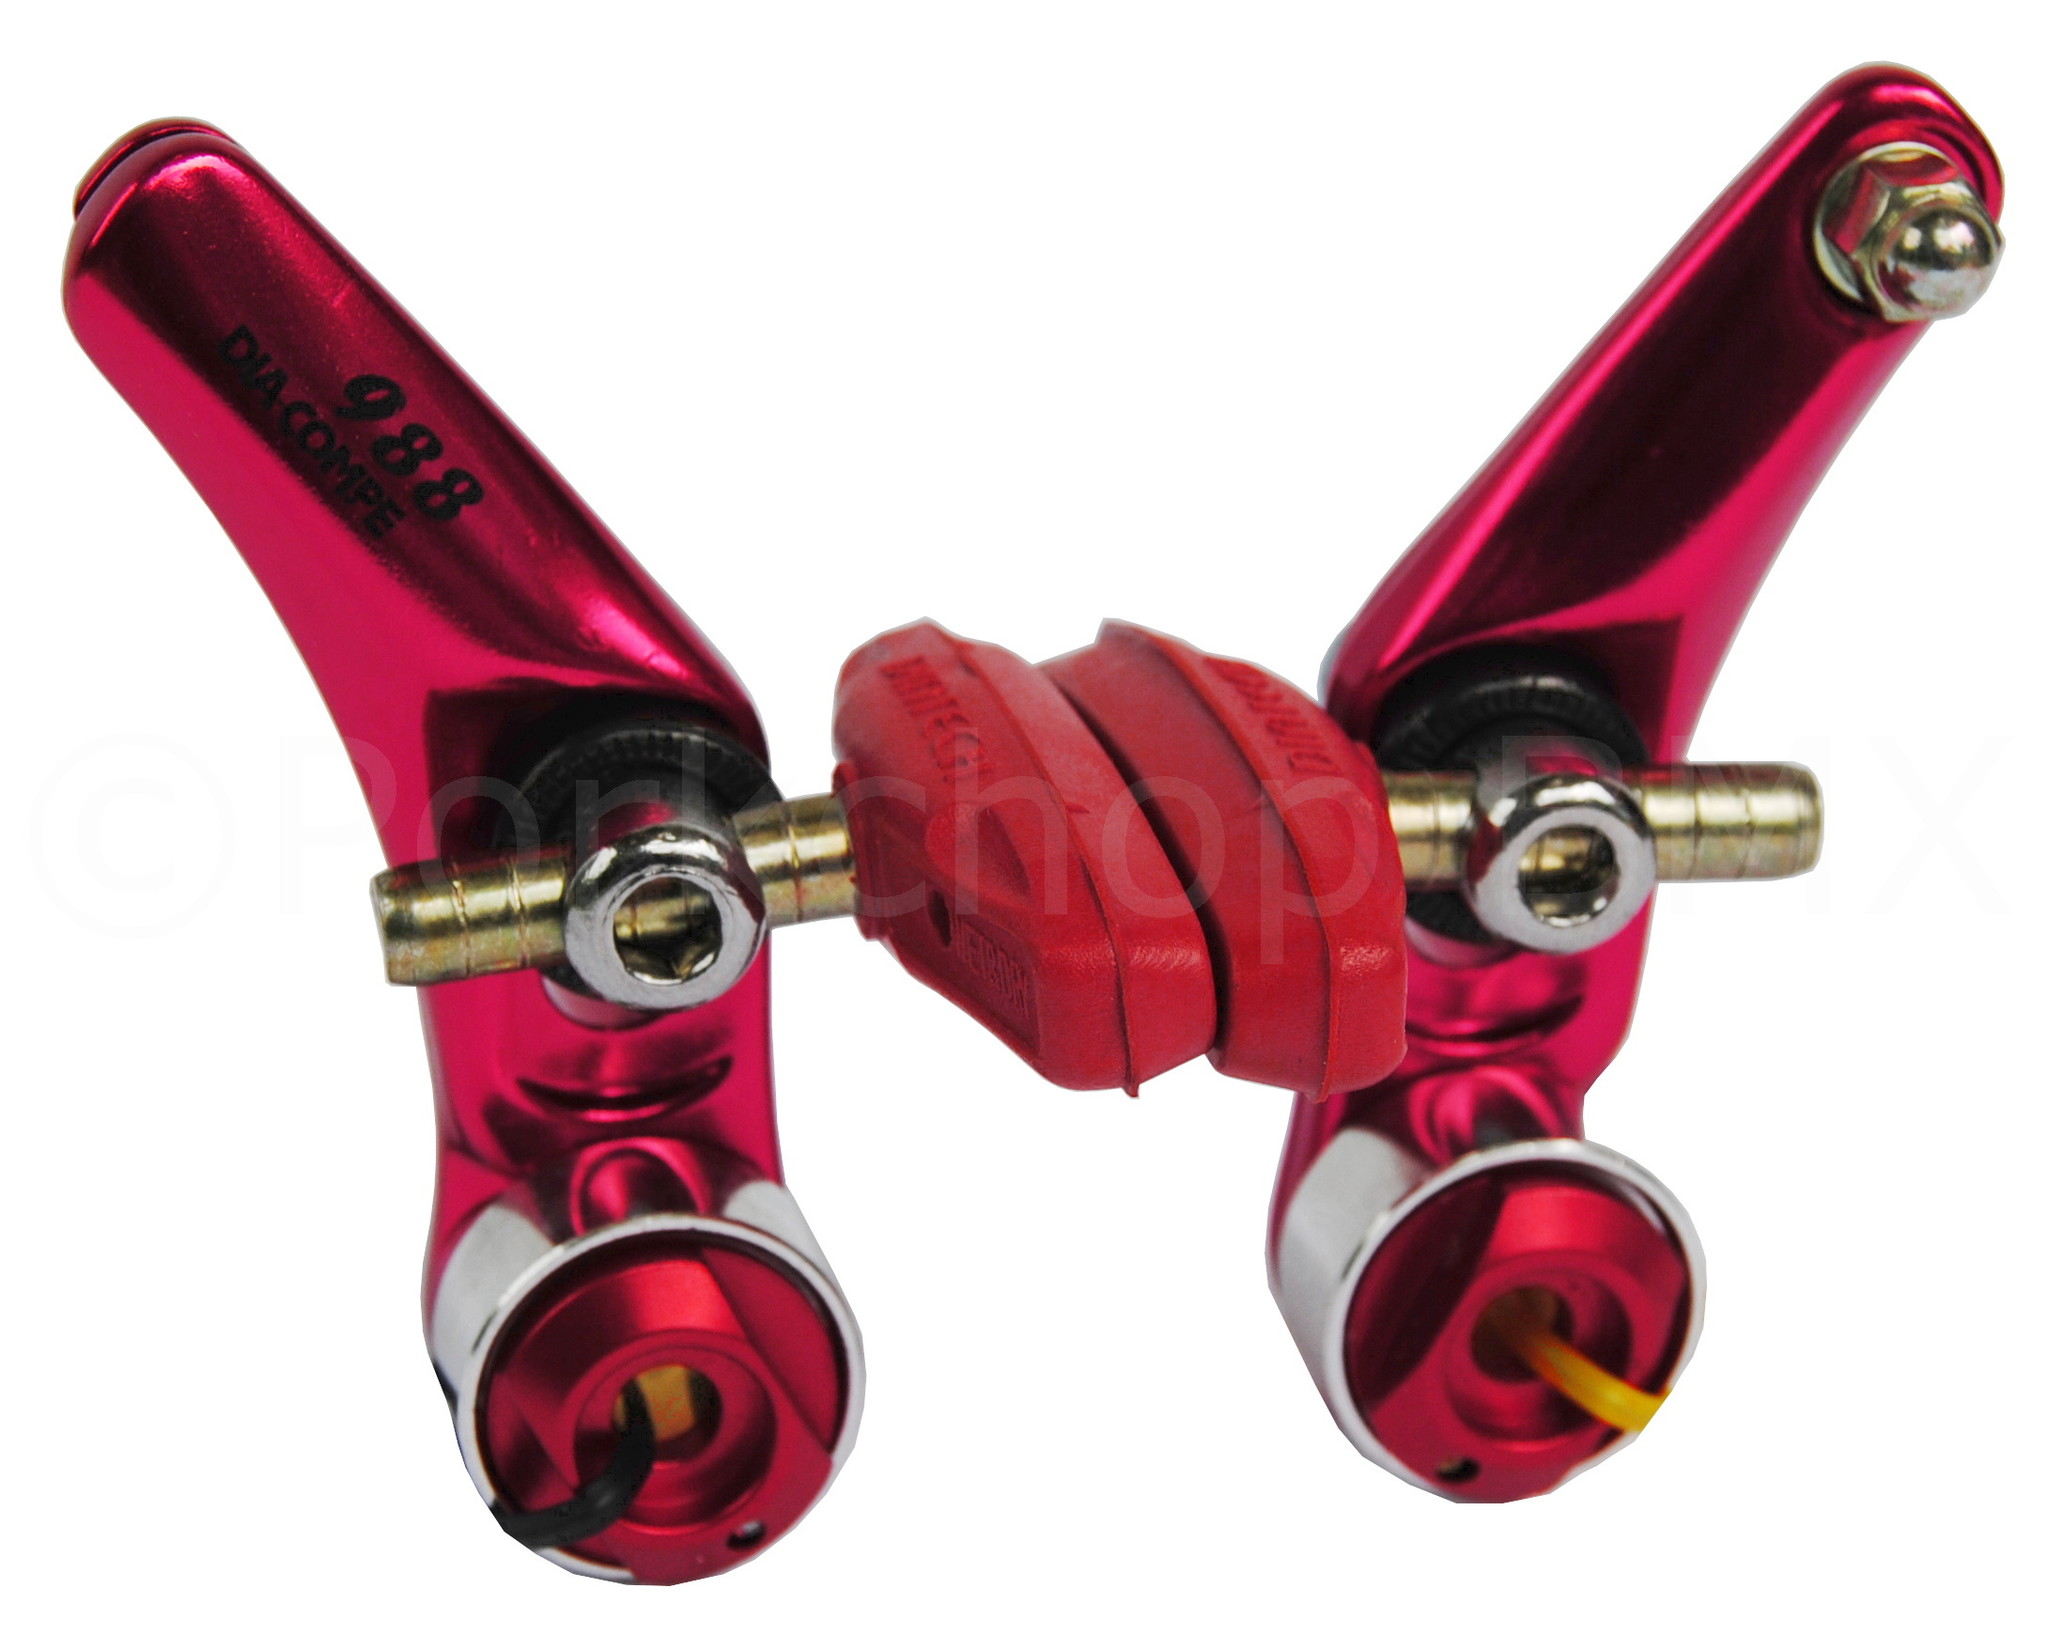 RED Dia-Compe Diatech Hombre threaded BMX bicycle brake pads 